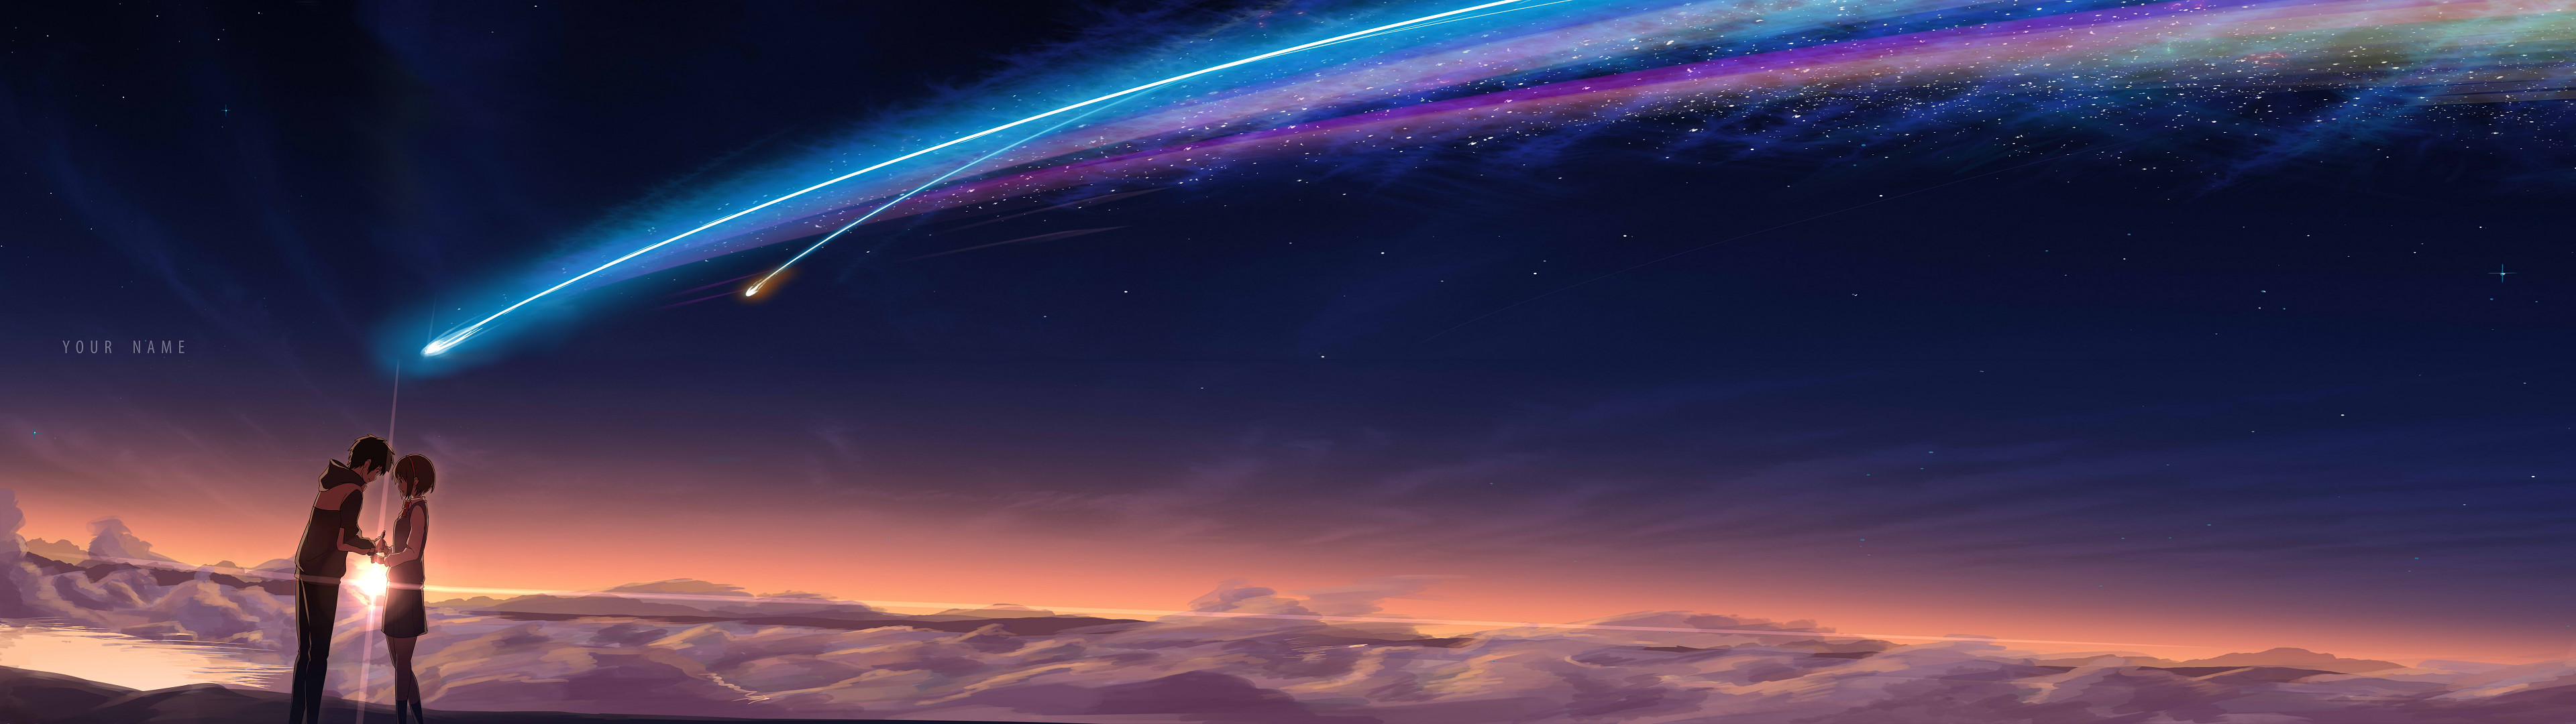 3840x1080 [] Kimi no na wa. Your Name. Hastily done dual monitor edit of a  widely available wallpaper.